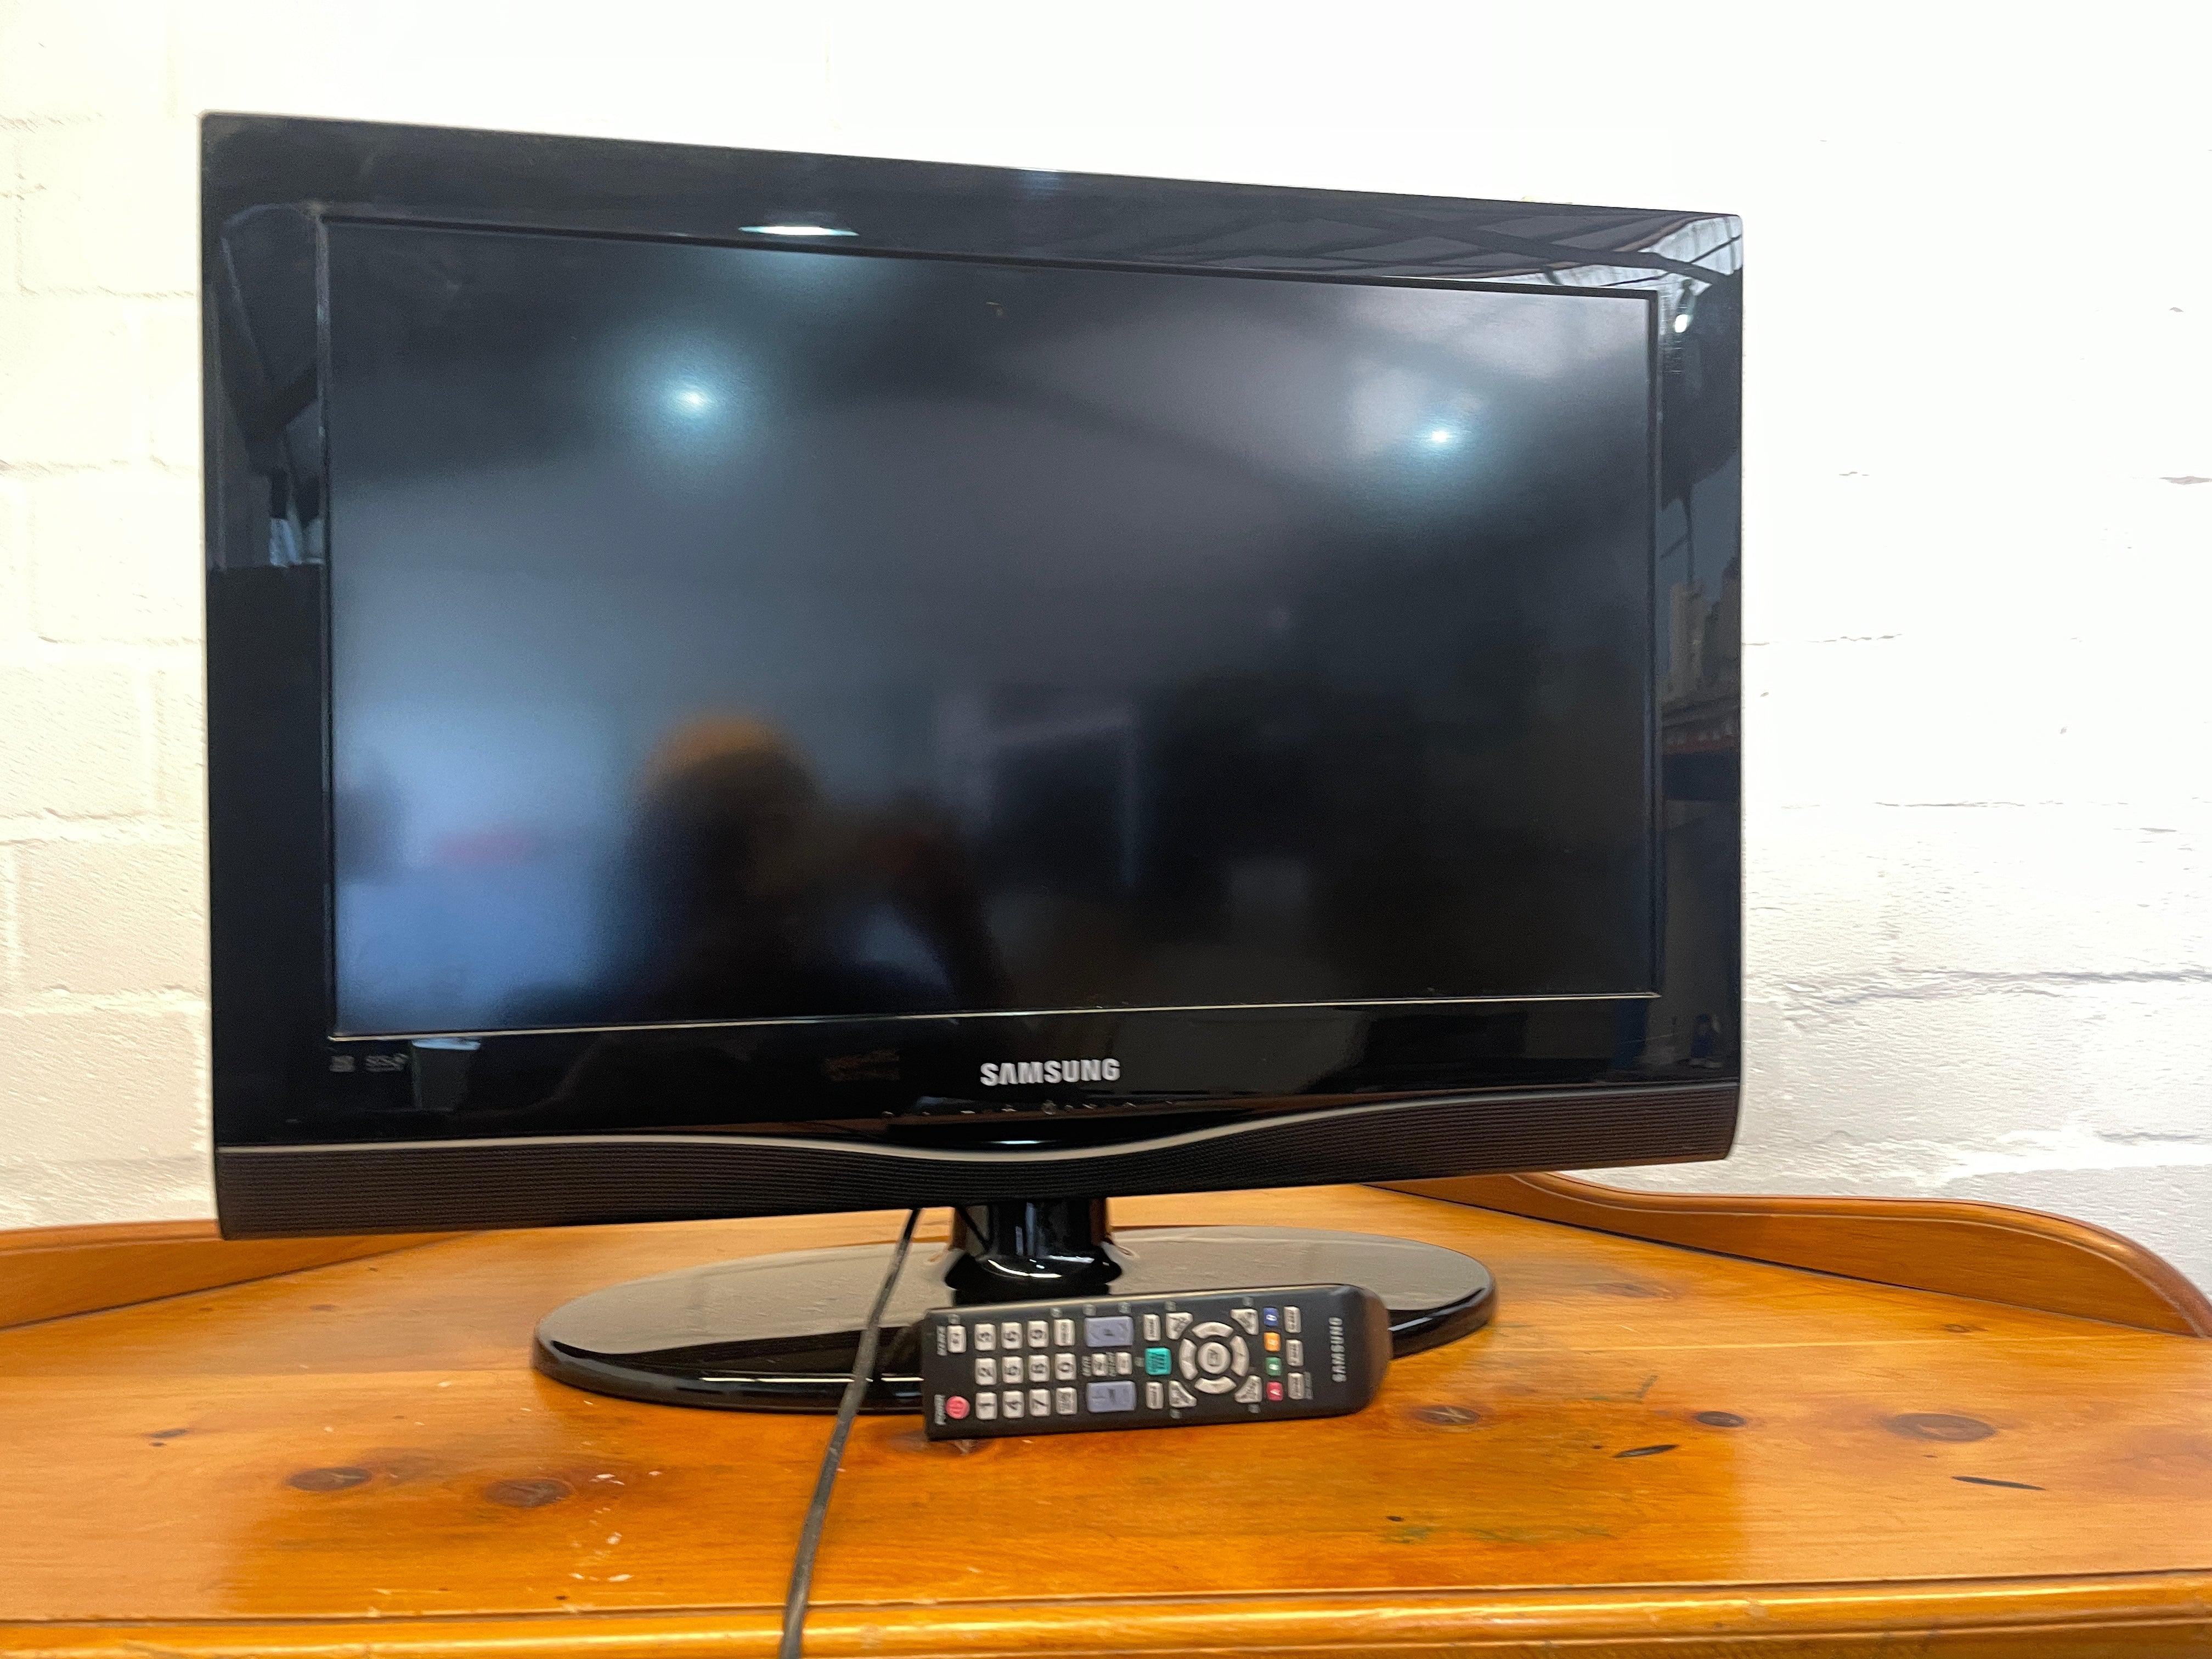 Samsung LCD 26 inch TV - electronics - by owner - sale - craigslist